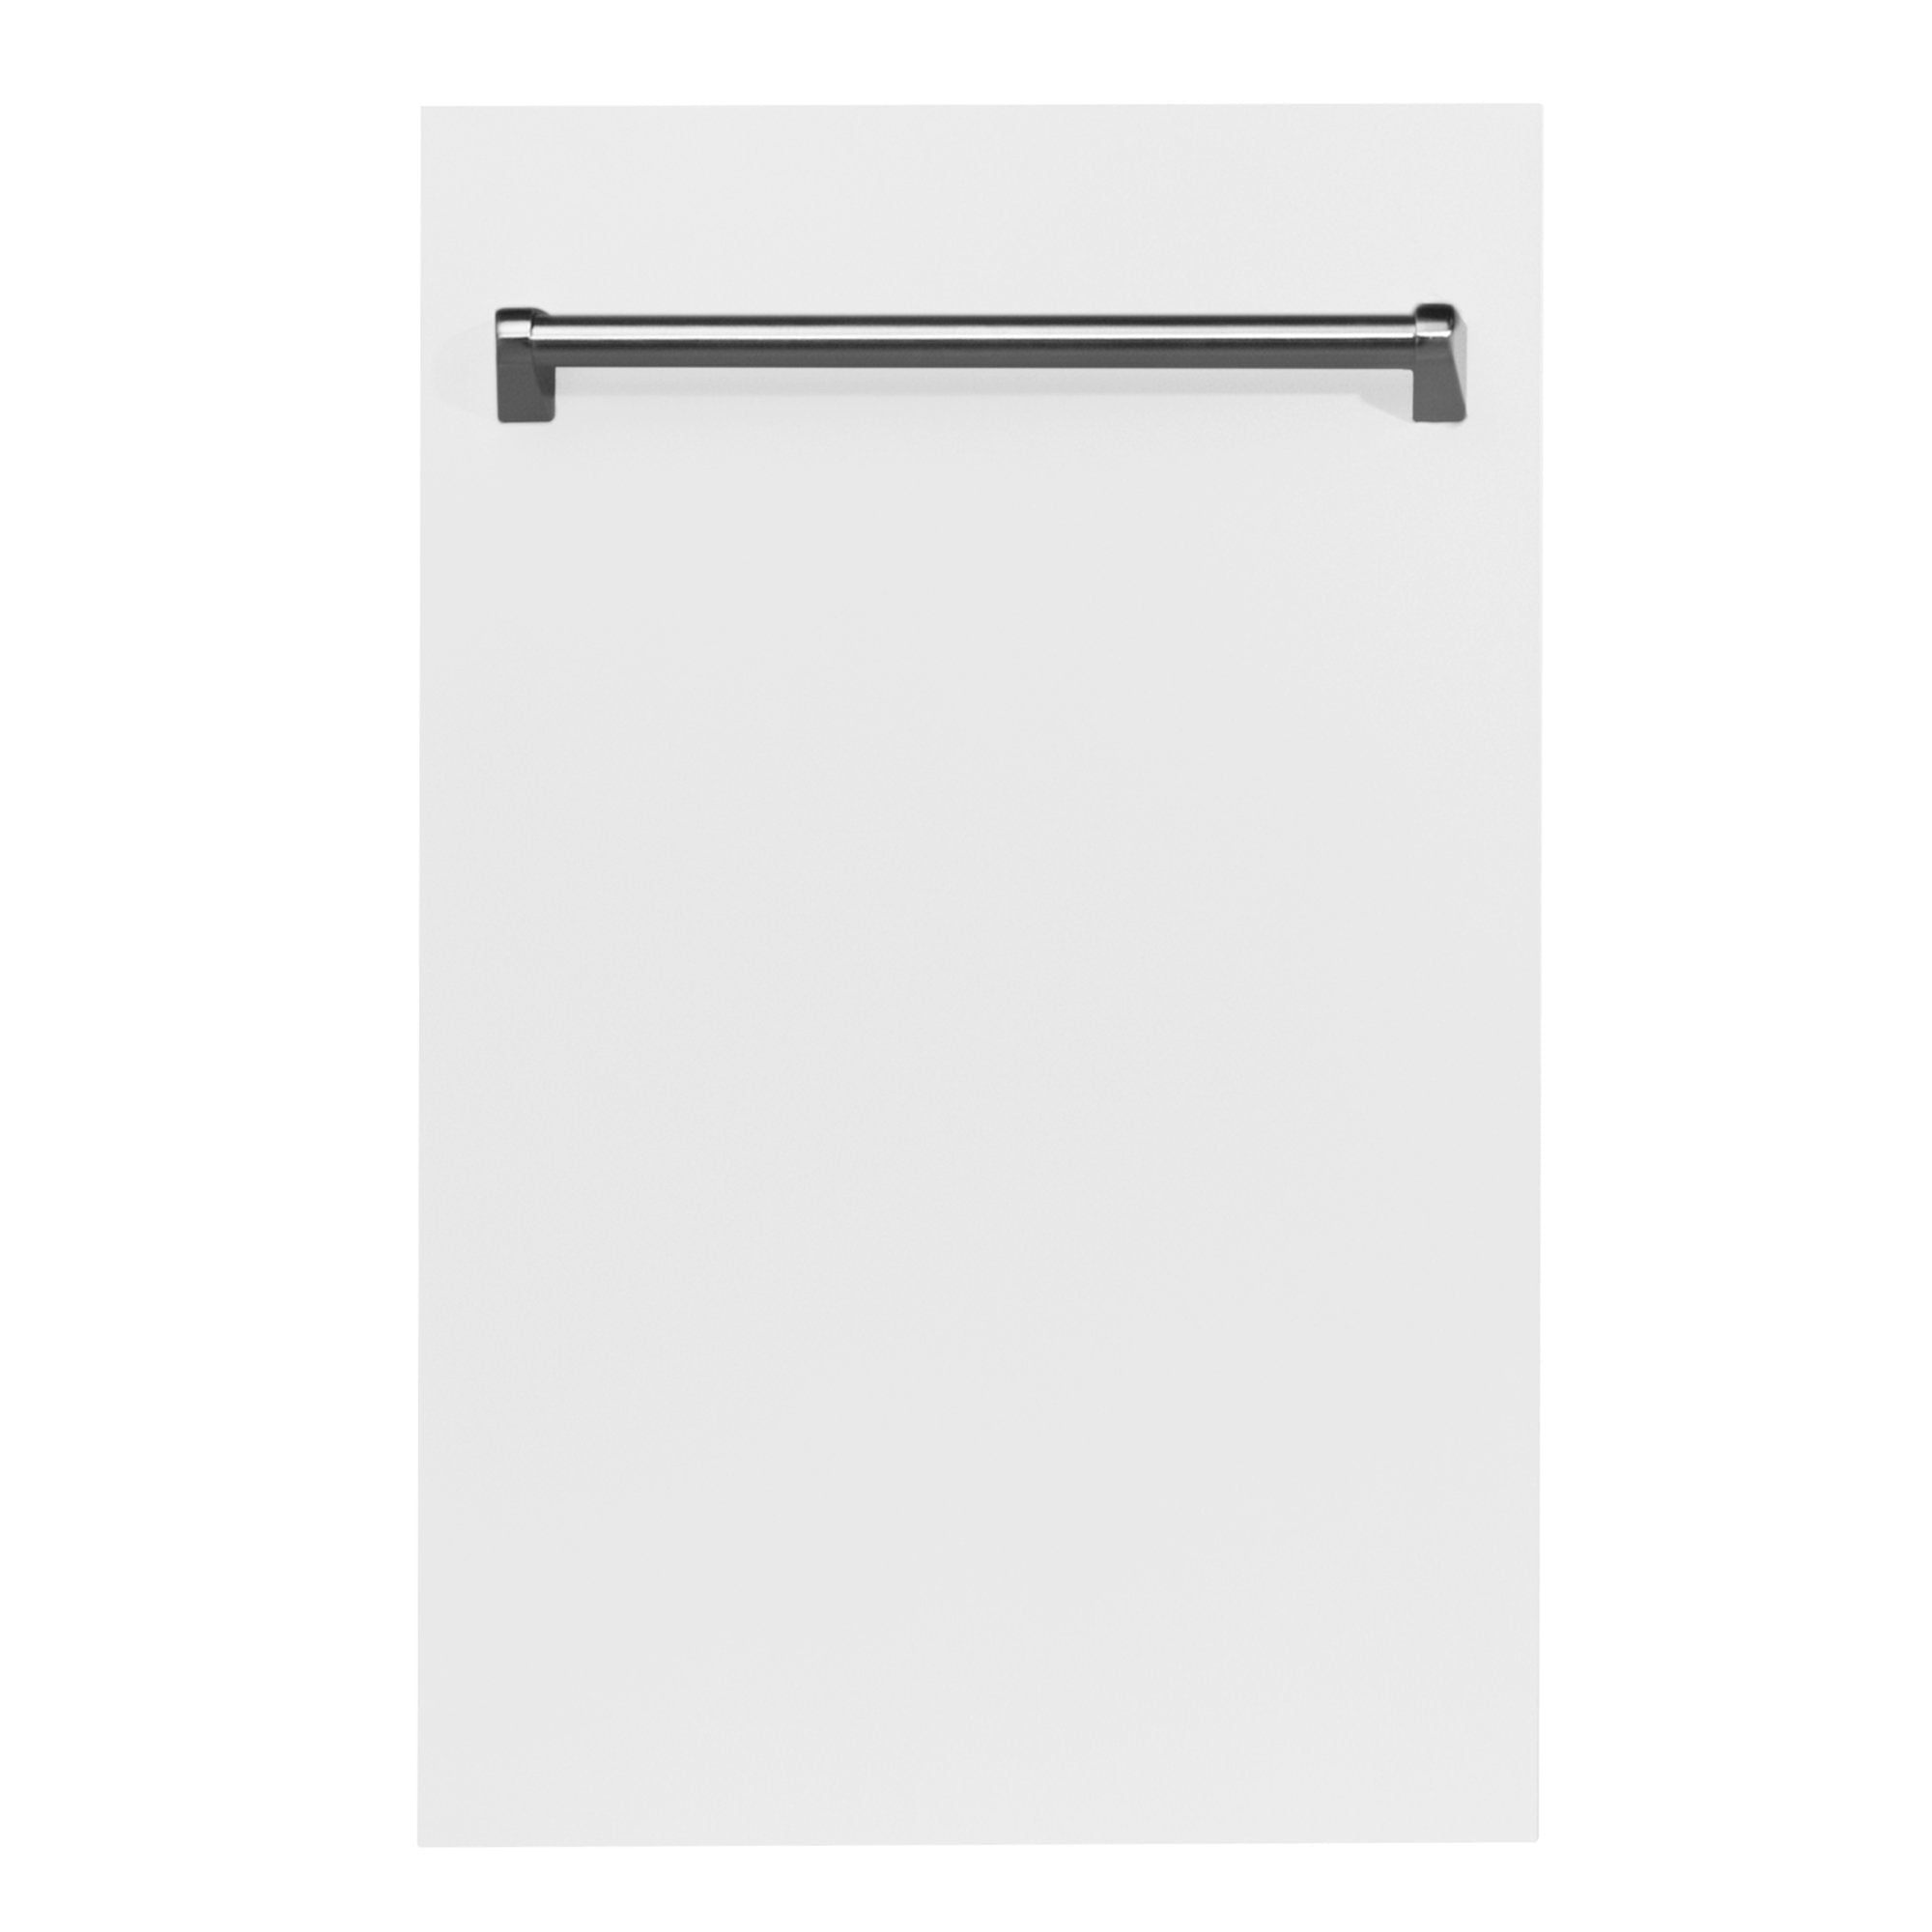 ZLINE 18 in. Compact Panel Ready Top Control Dishwasher with Stainless Steel Tub, 40dBa